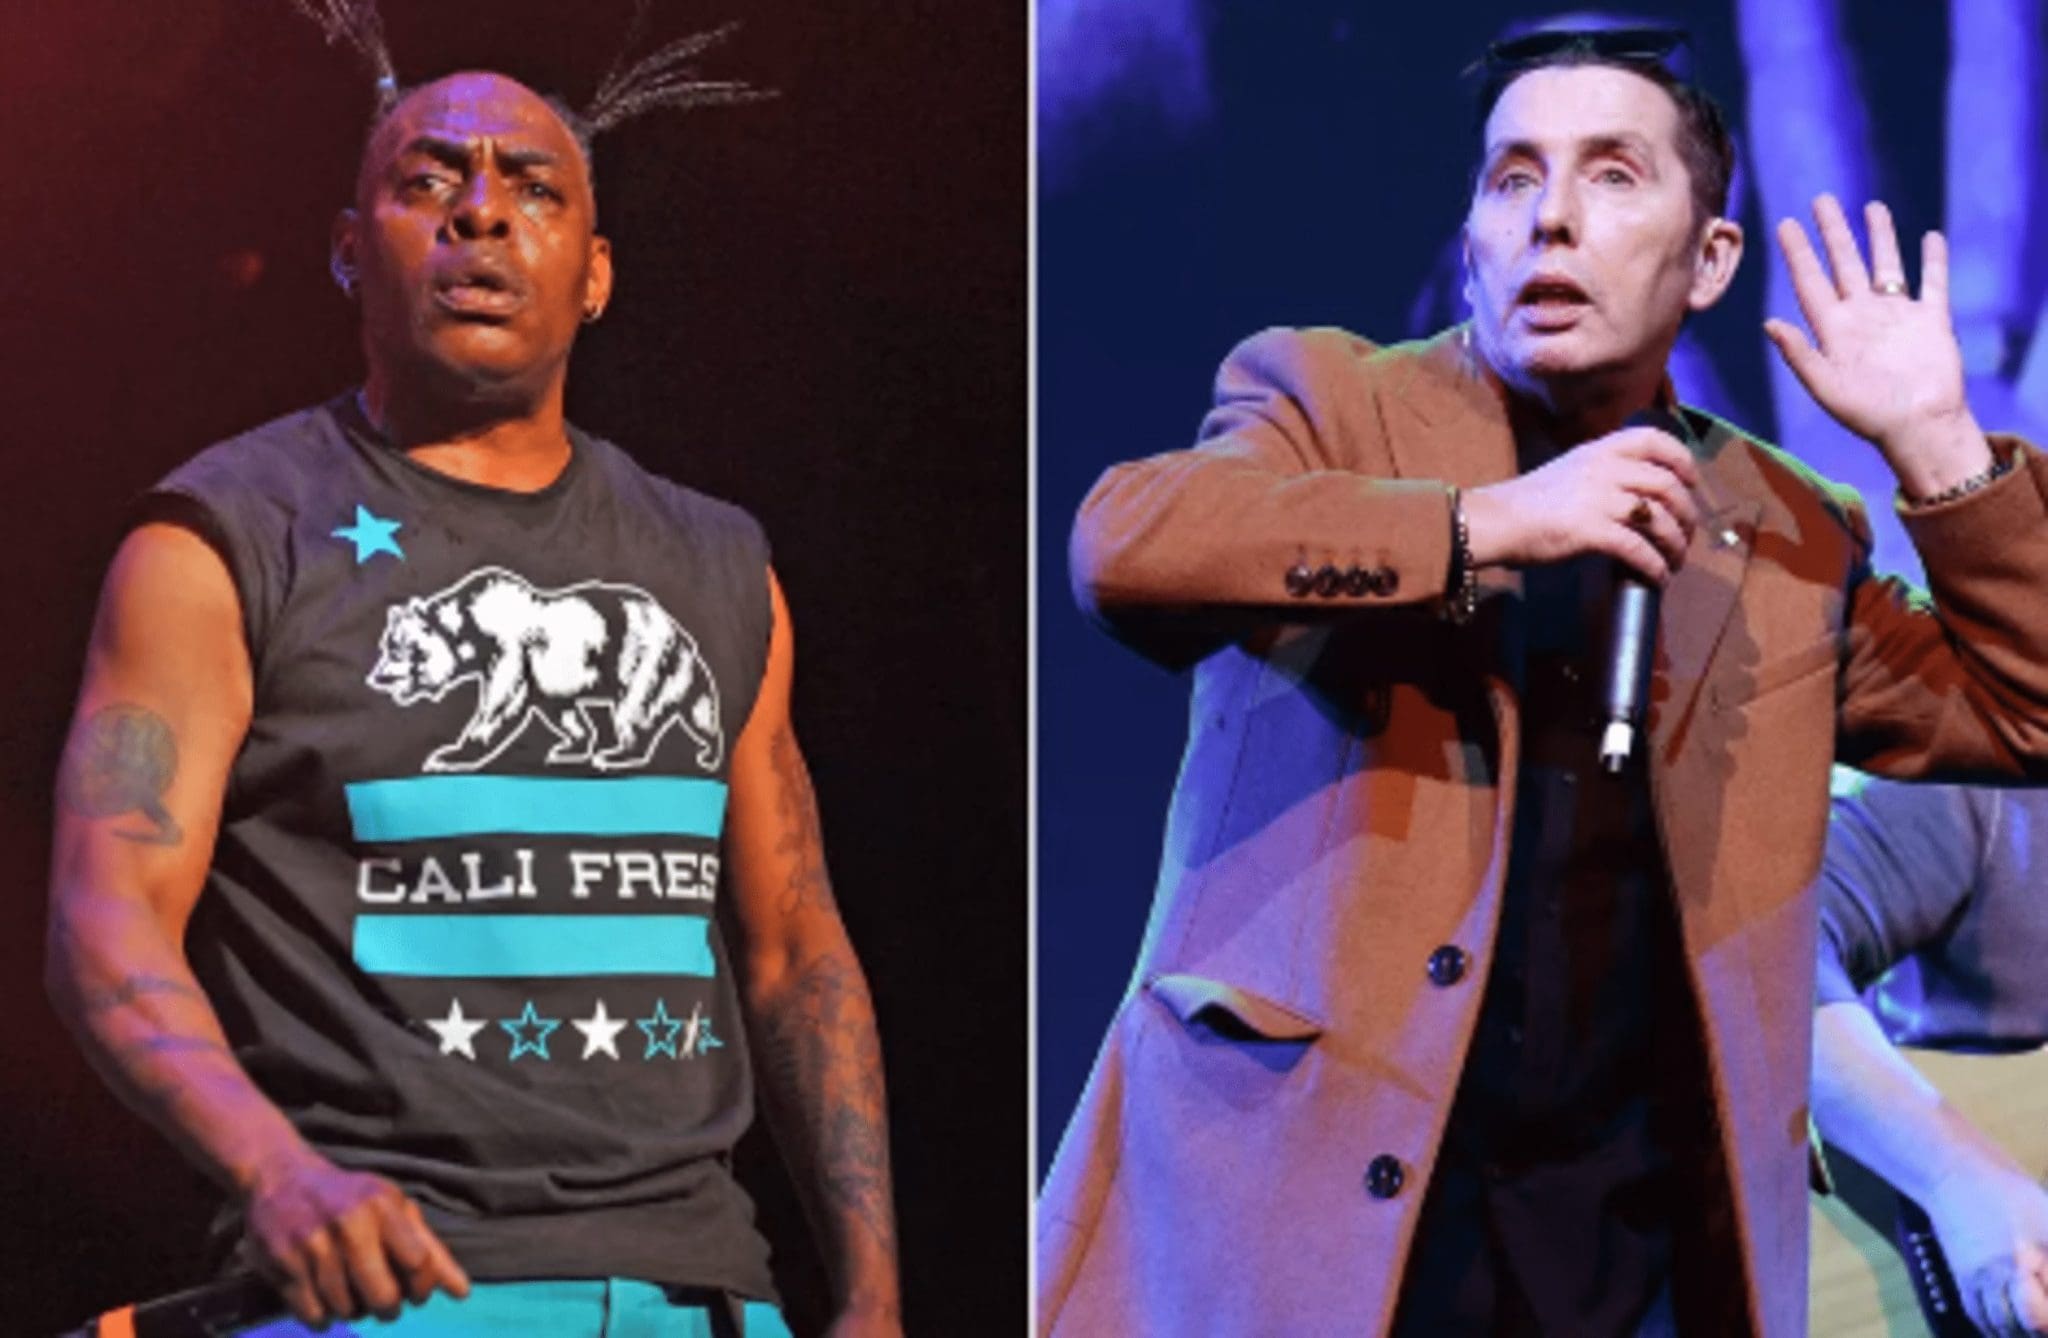 Before his passing, Coolio was collaborating with an Irish singer on new music.